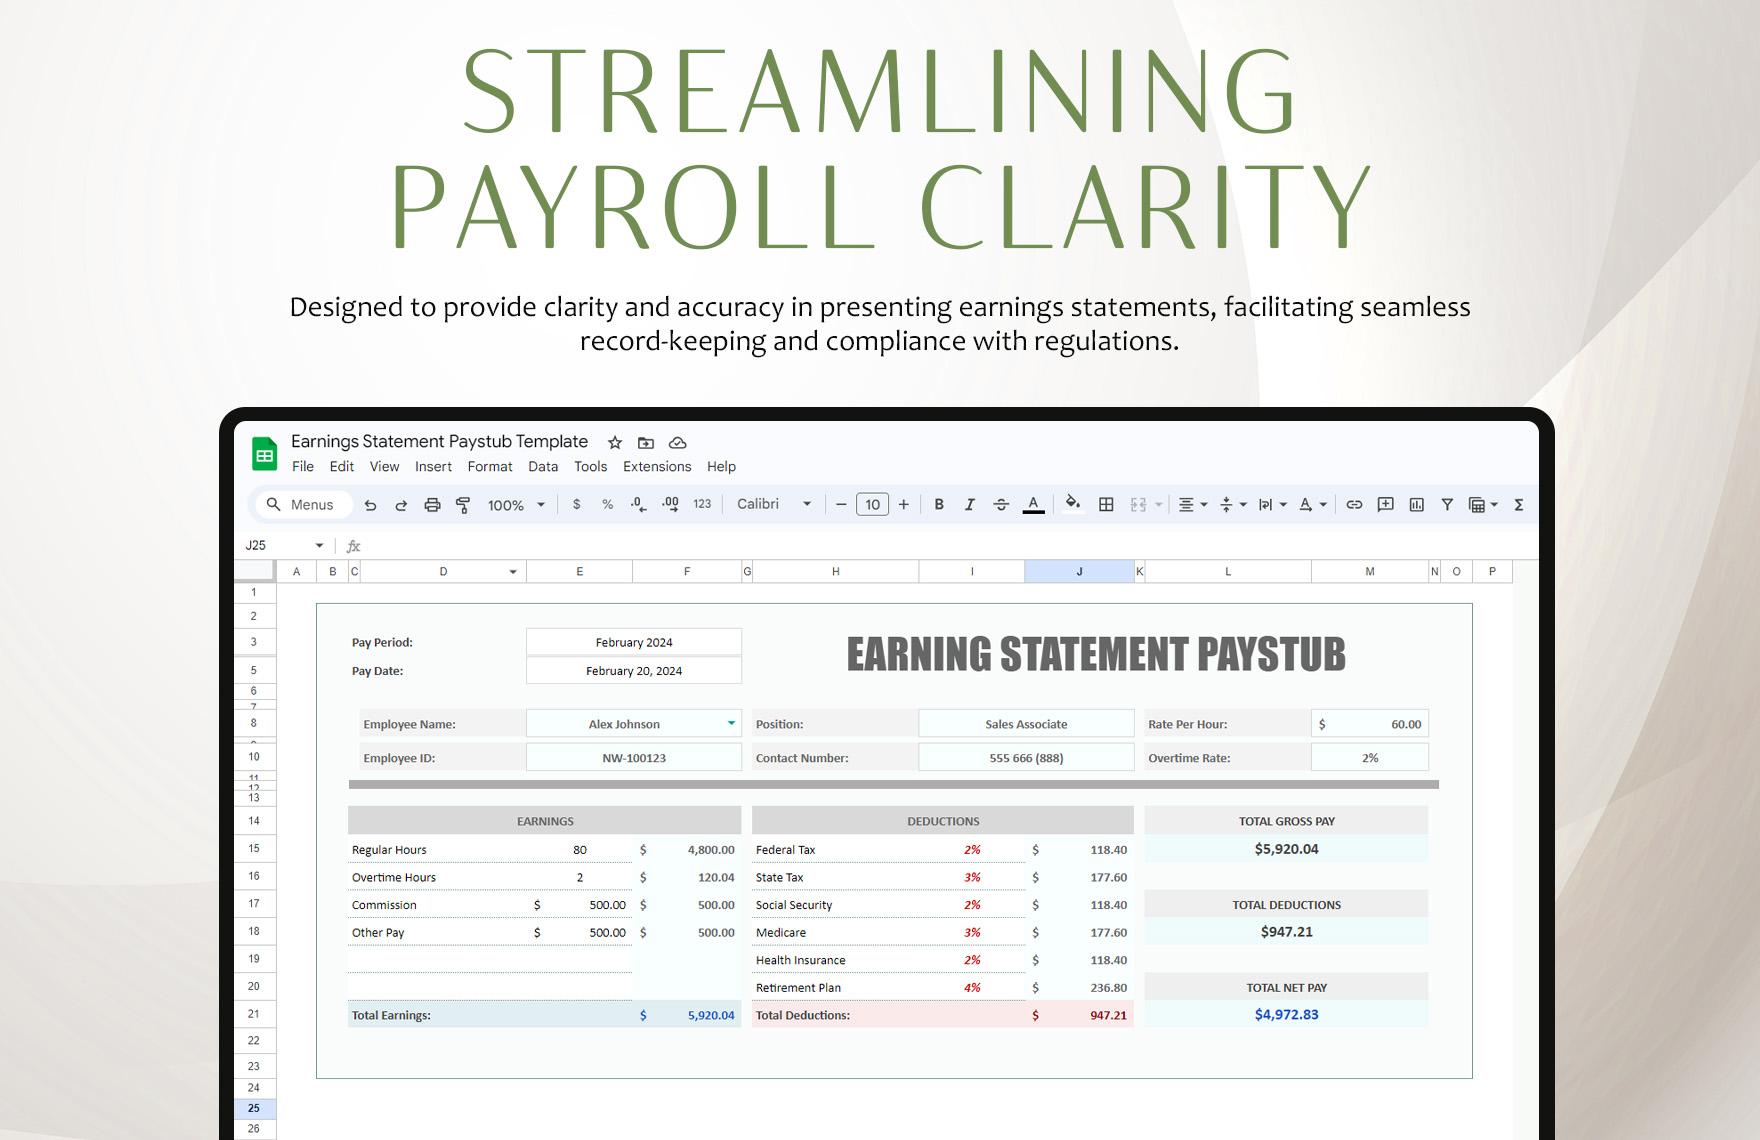 Earnings Statement Paystub Template